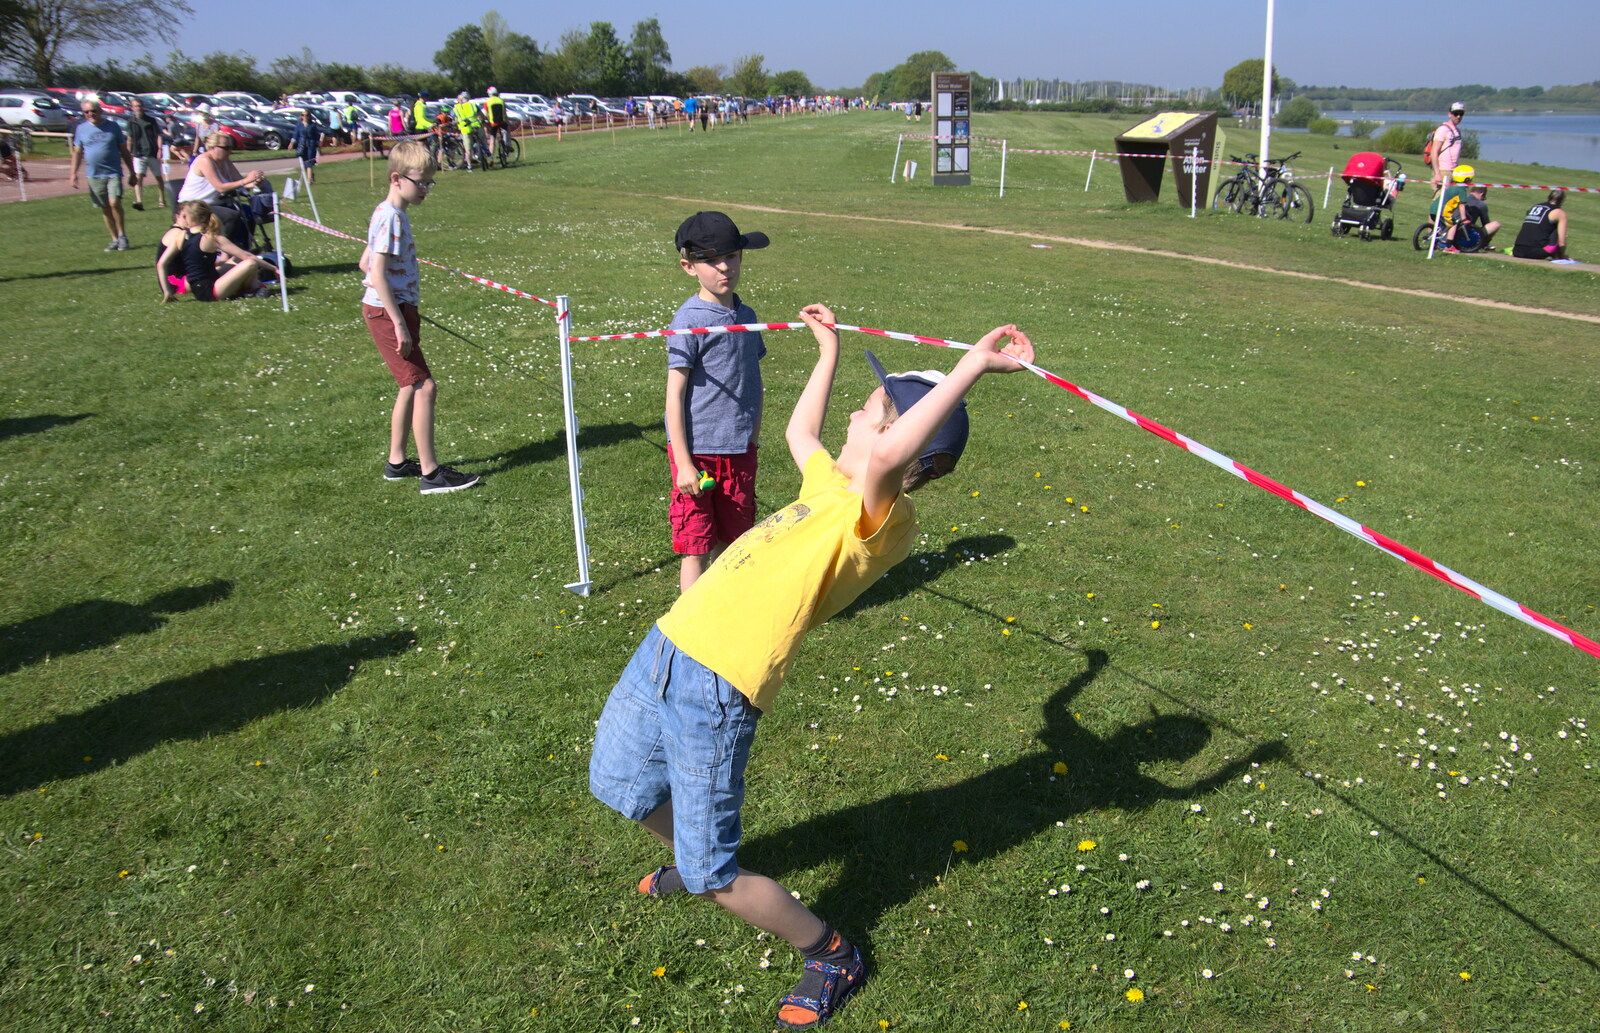 The boys do a spot of limbo from Isobel's 10km Run, Alton Water, Stutton, Suffolk - 6th May 2018